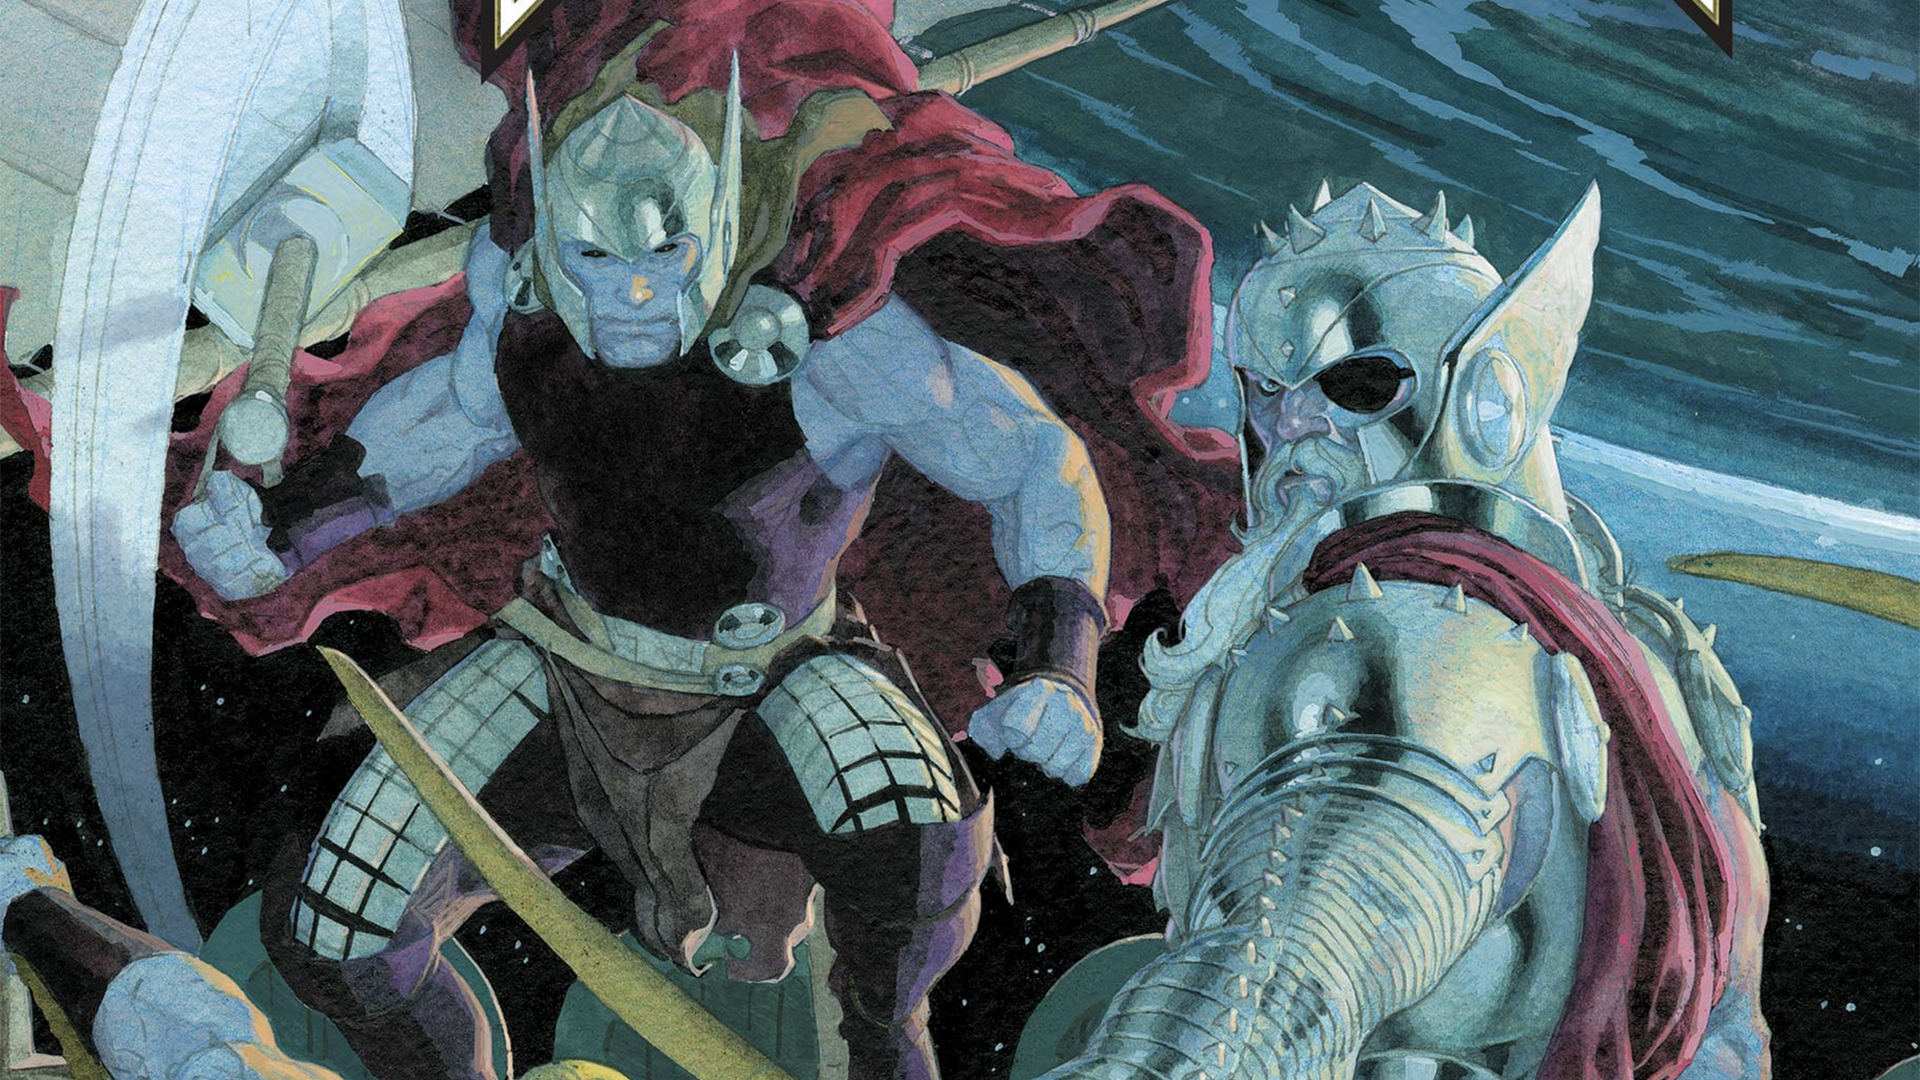 Crazy Alternate Character Designs For Gorr The God Butcher in THOR